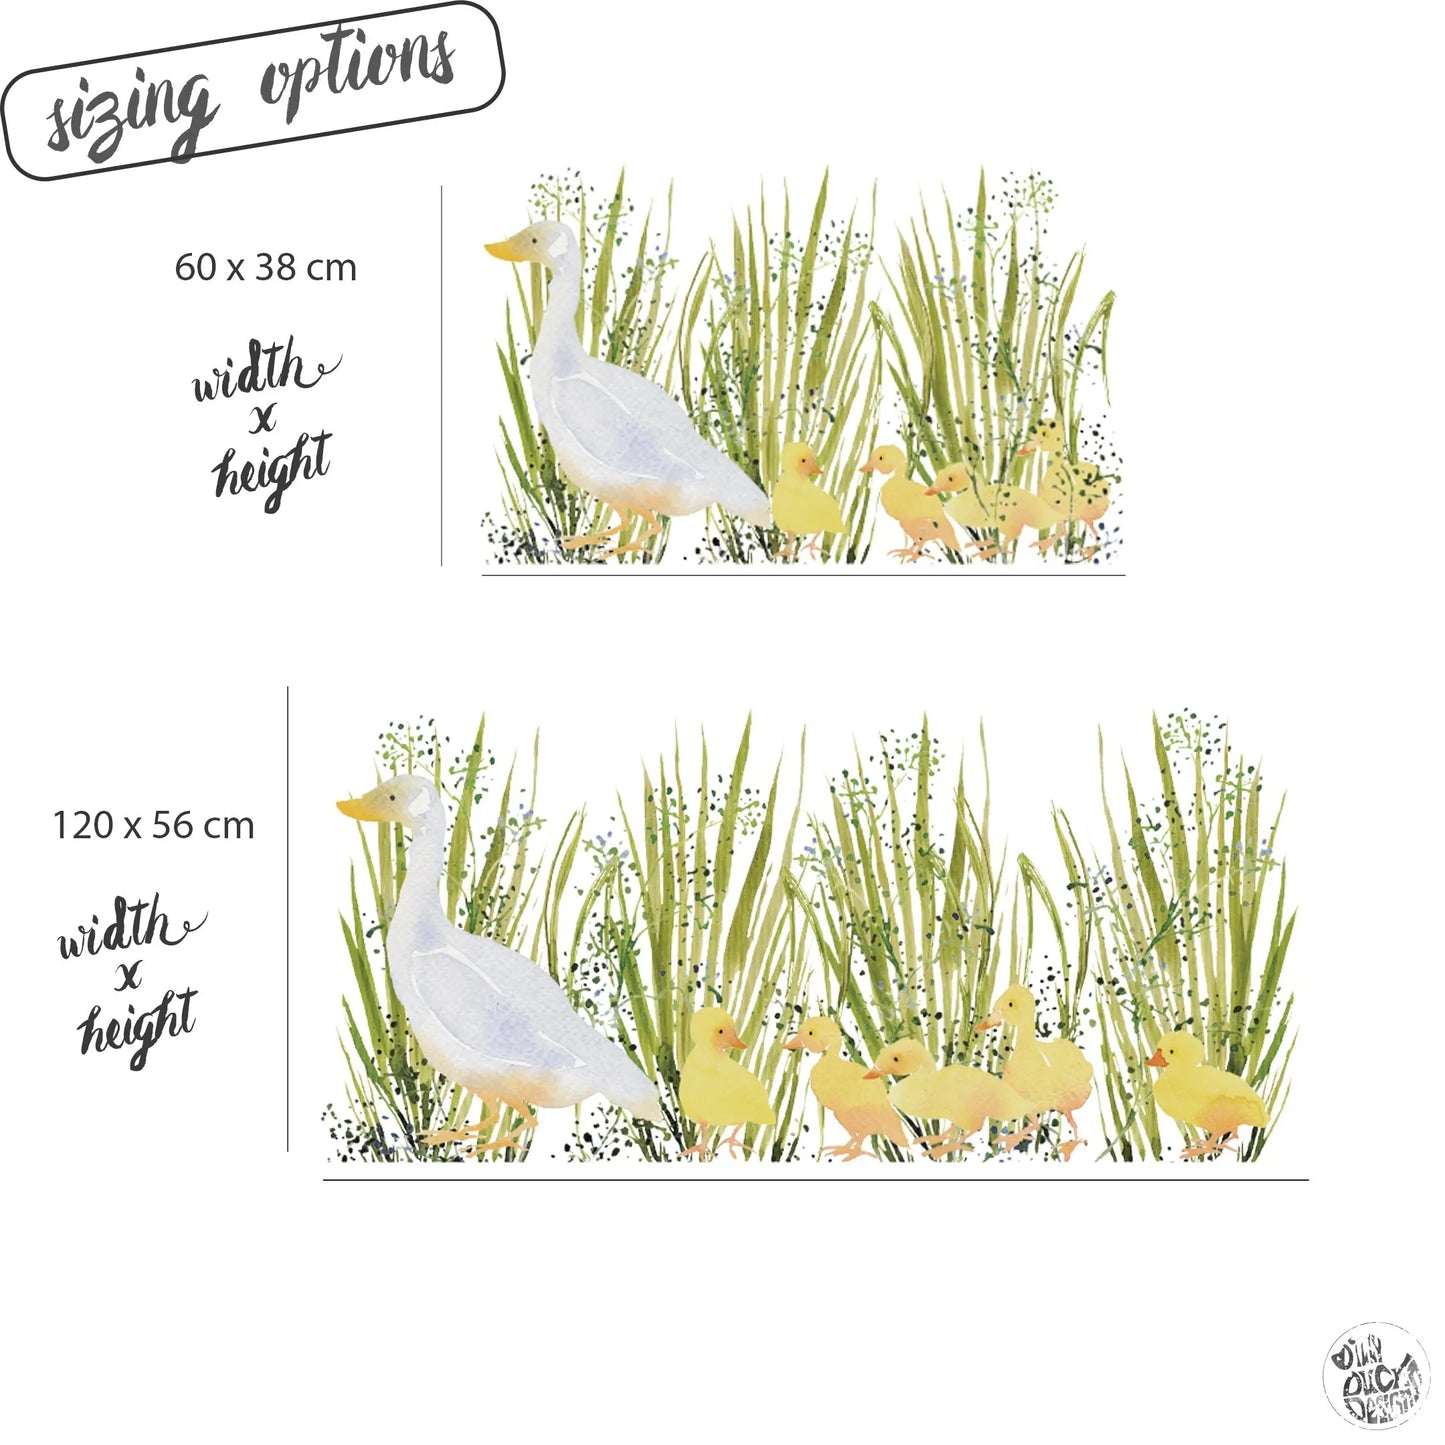 Decal Watercolour Spring Ducklings Window Decal Dizzy Duck Designs